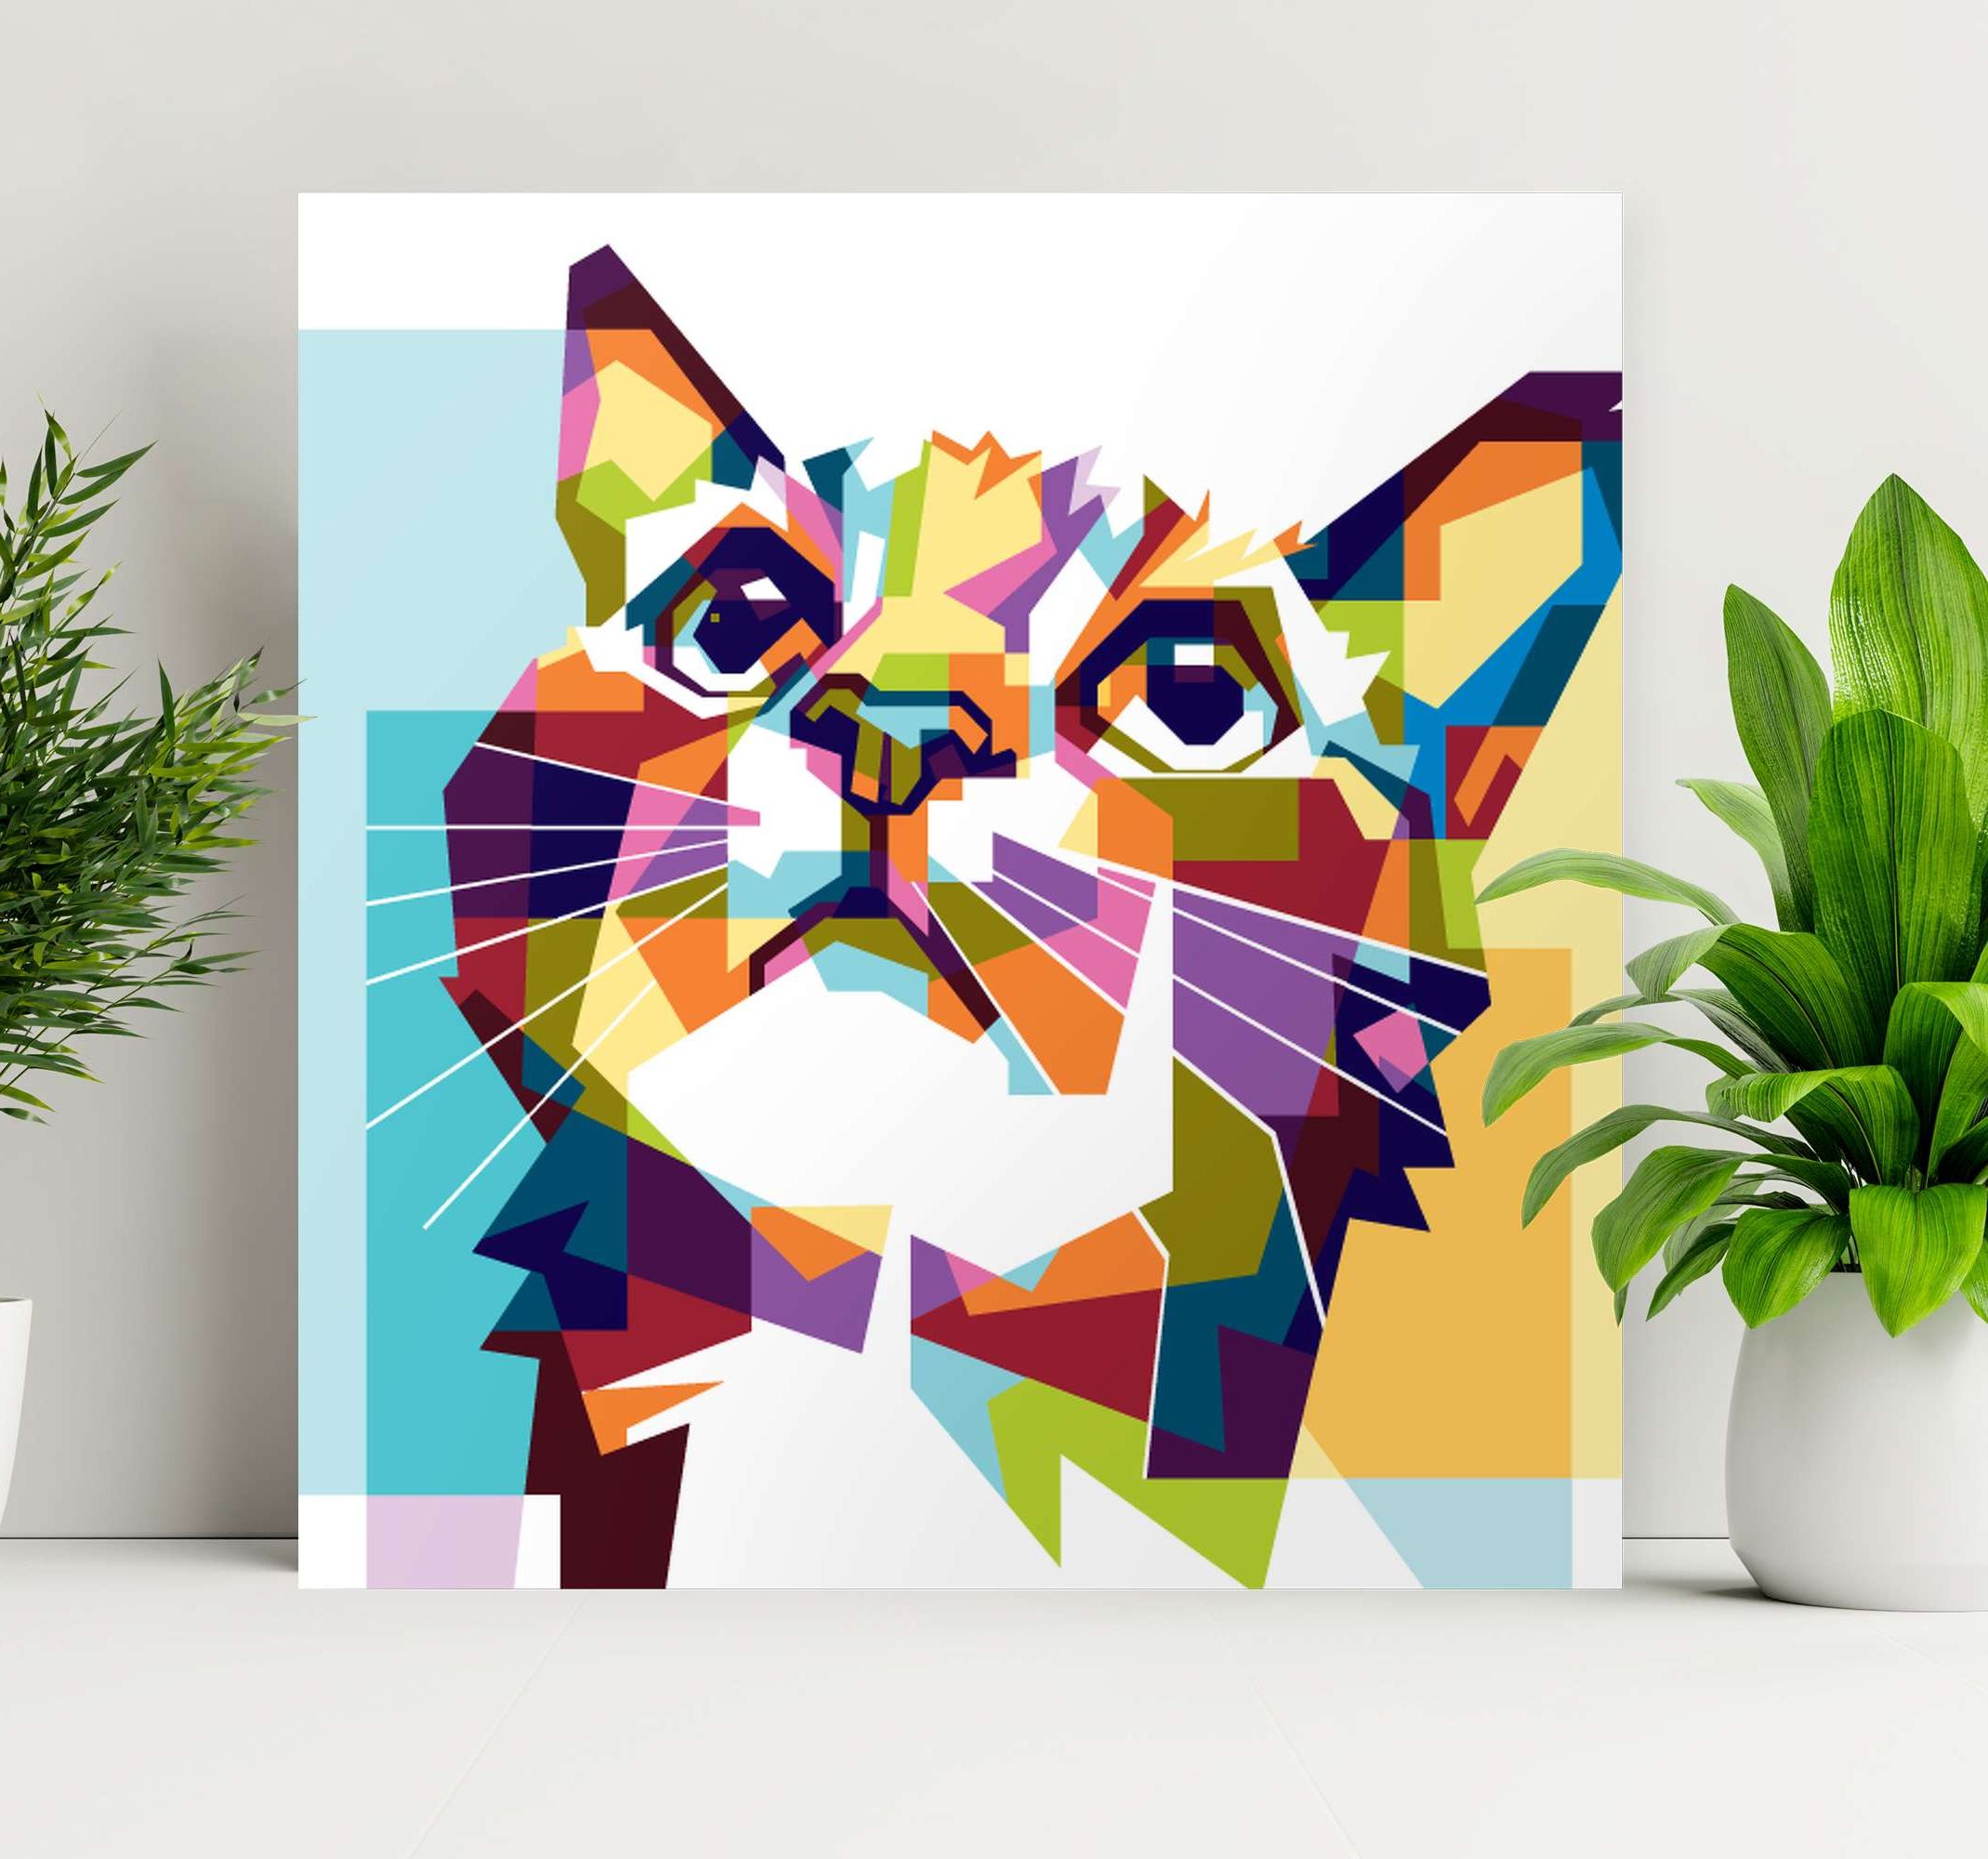 Cats Wall Art Pertaining To Latest Geometric Cat Wall Art Canvas – Tenstickers (Photo 11 of 15)